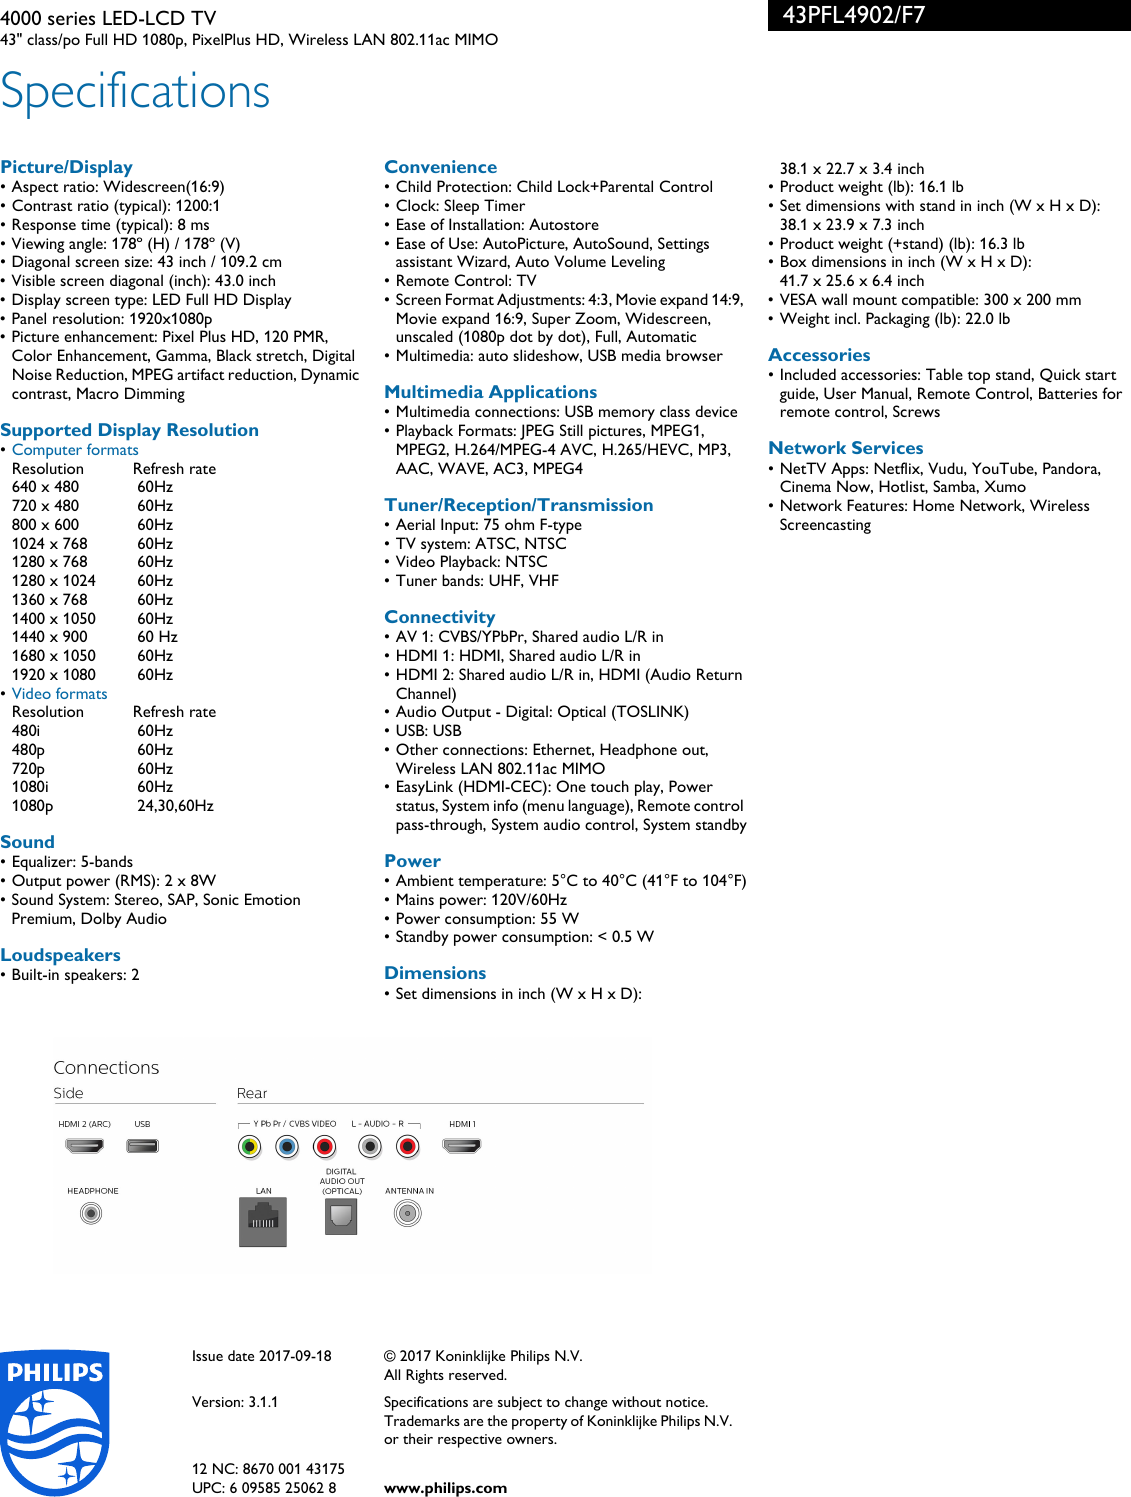 Page 3 of 3 - Philips 43PFL4902/F7 4000 Series LED-LCD TV With NetTV User Manual Leaflet 43pfl4902 F7 Pss Aenus